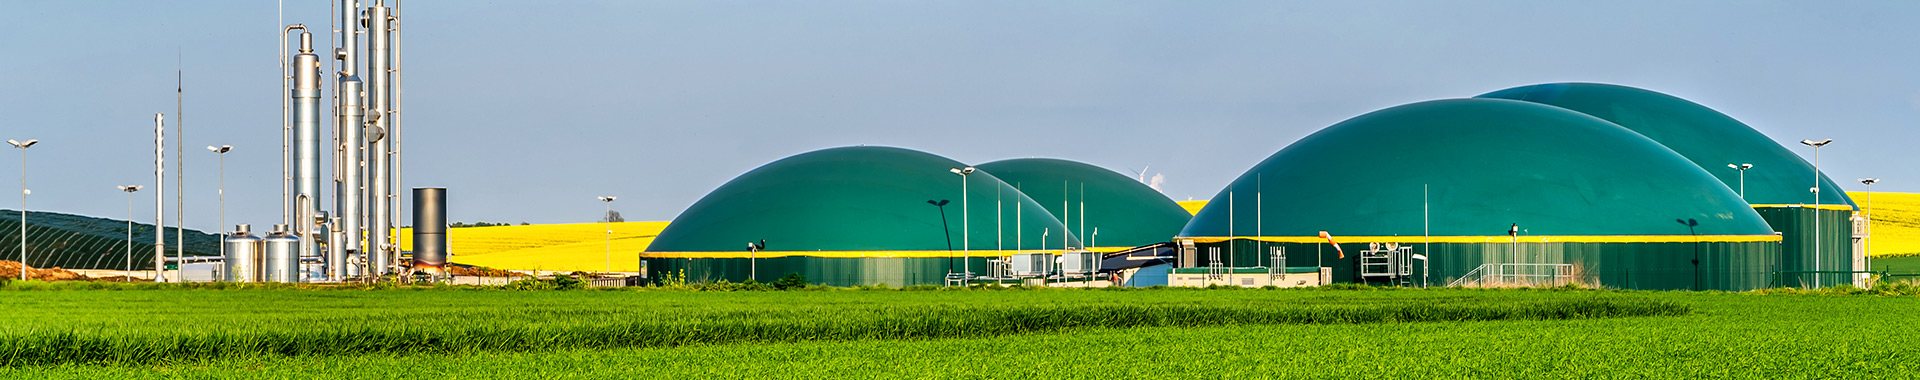 Destination - Biogas & Combined Heat and Power (CHP)